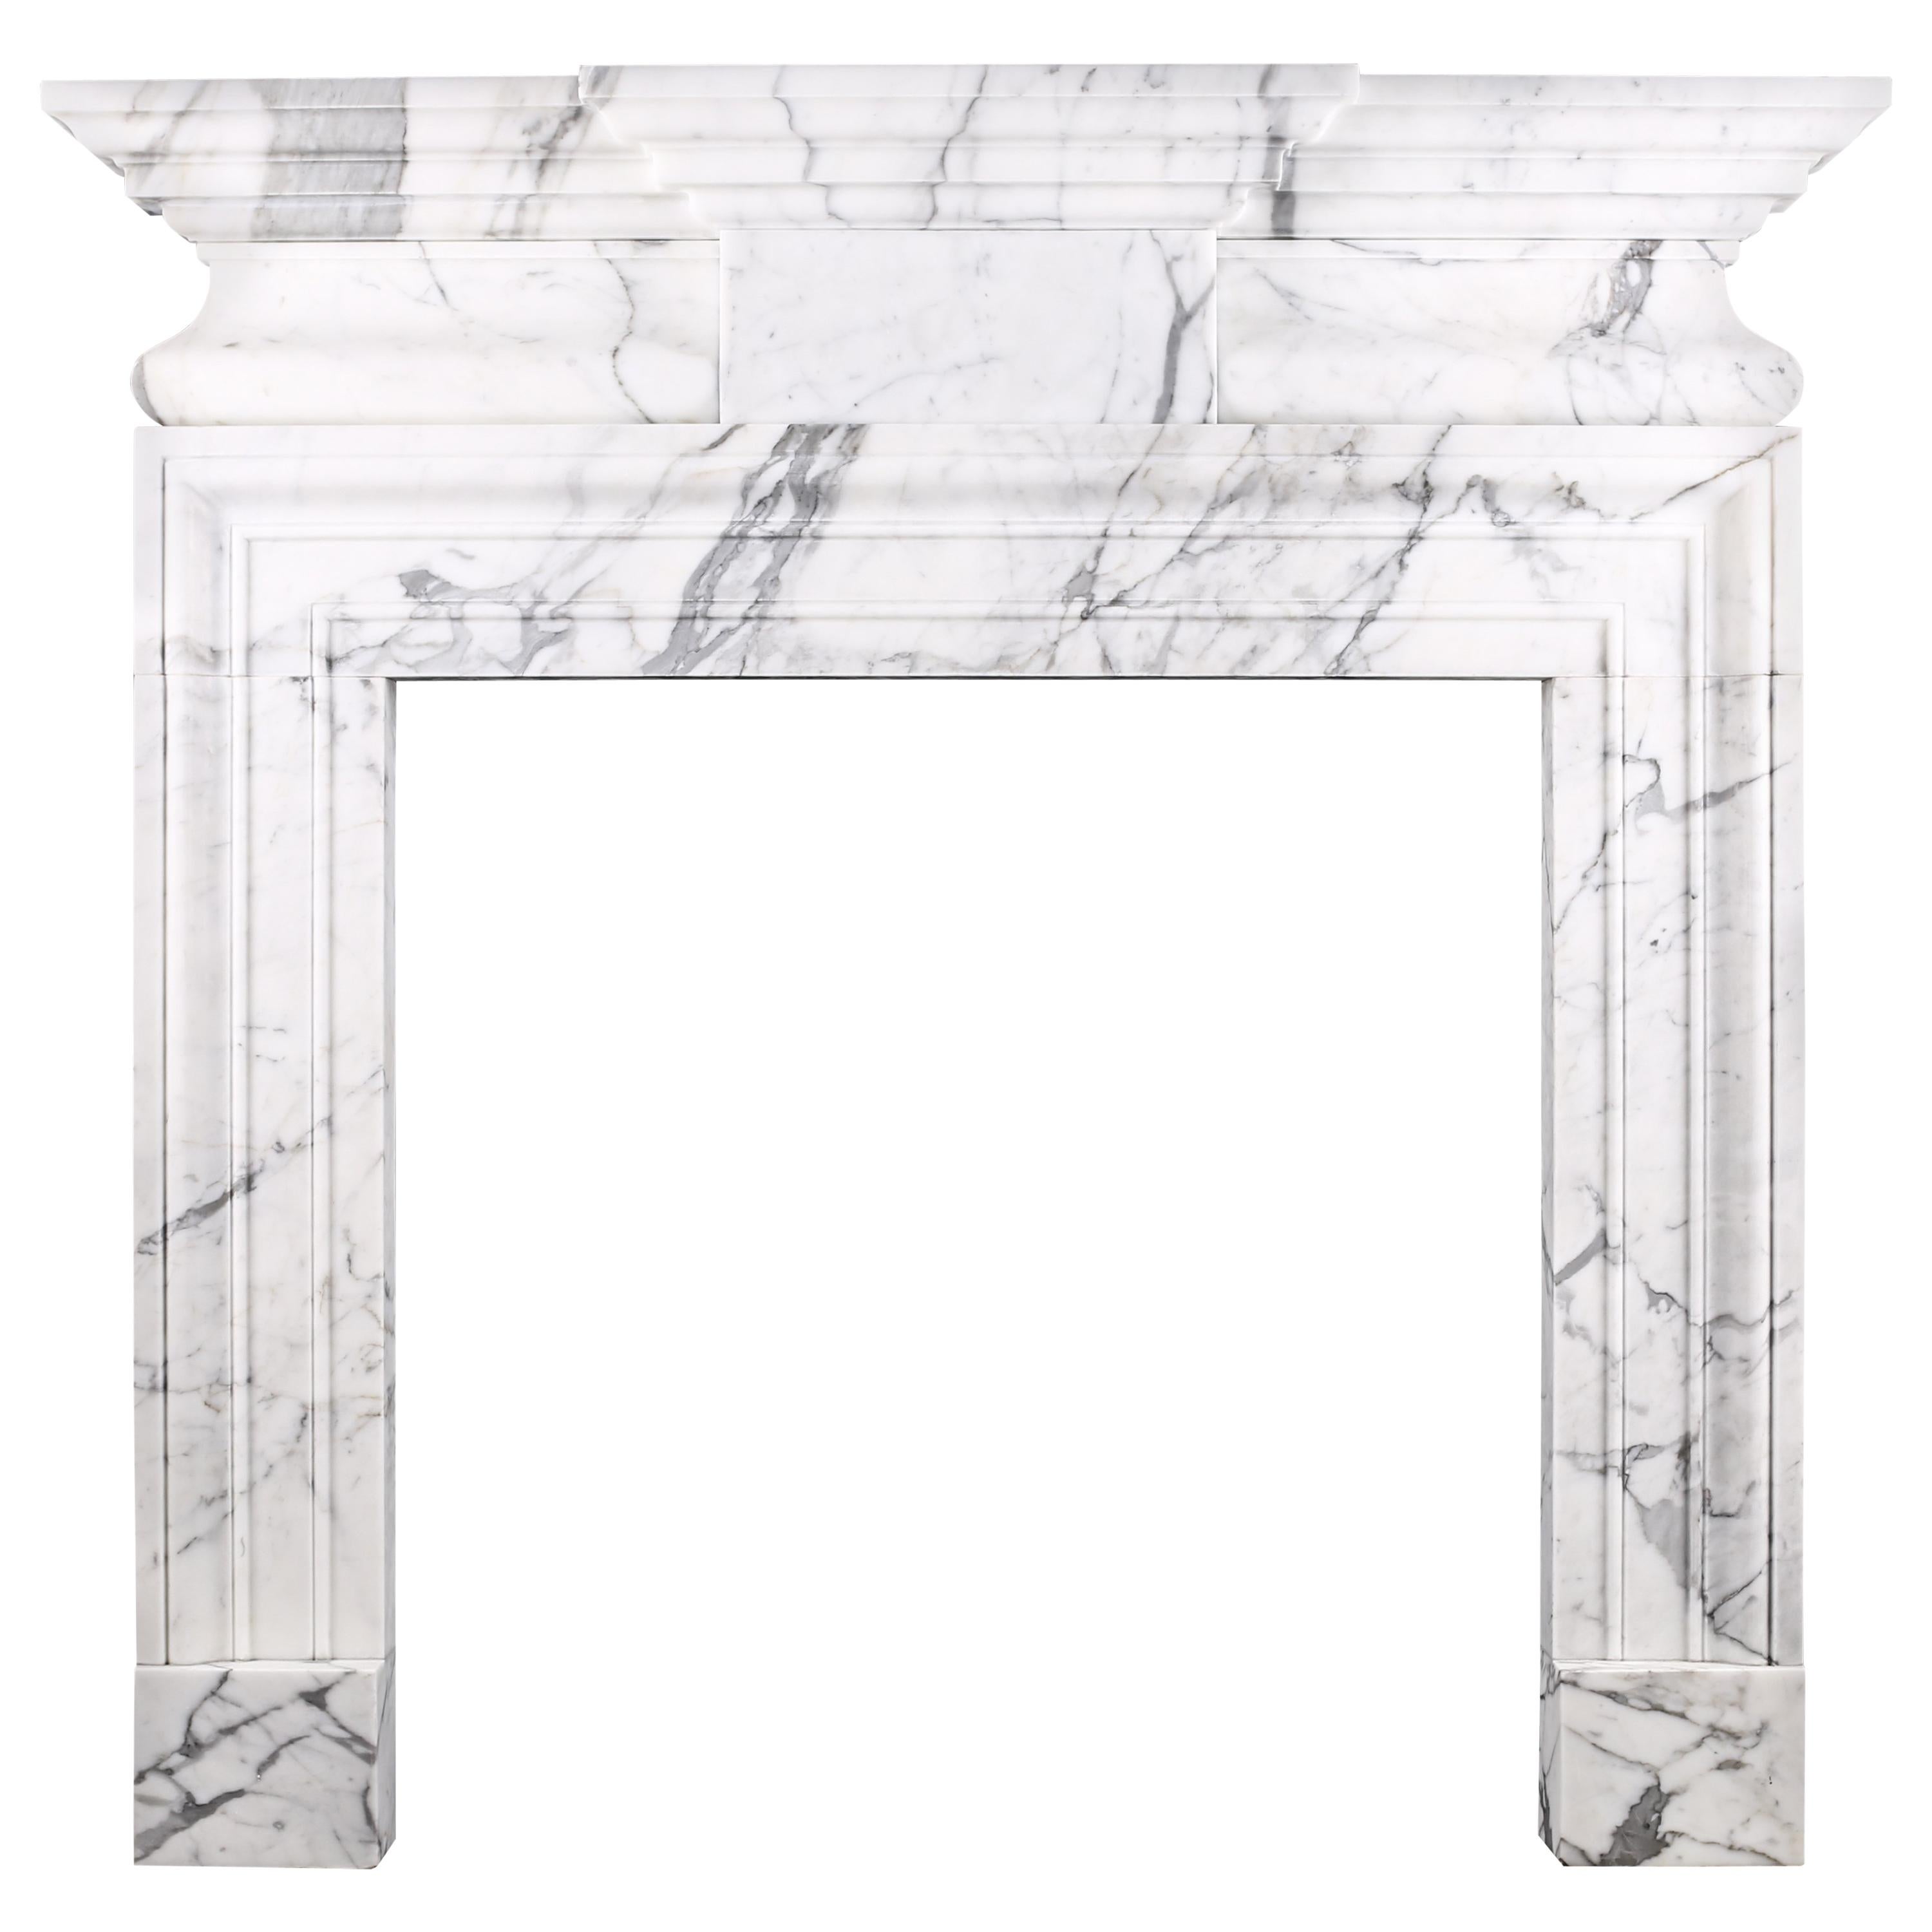 Grand Mid-18th Century Baroque Bolection Fireplace Mantel Shelf Statuary Marble For Sale